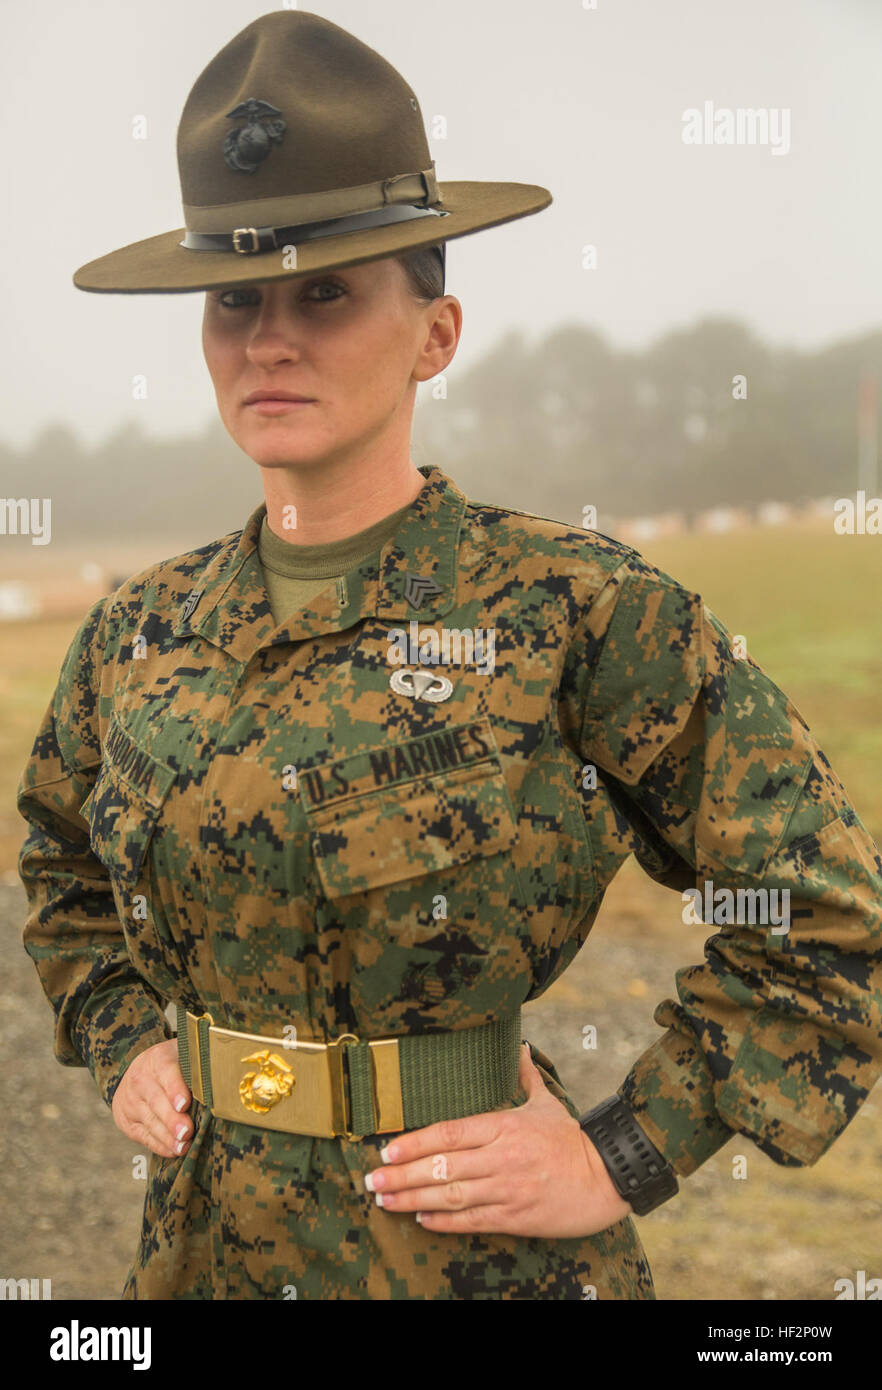 Find My Drill Instructor